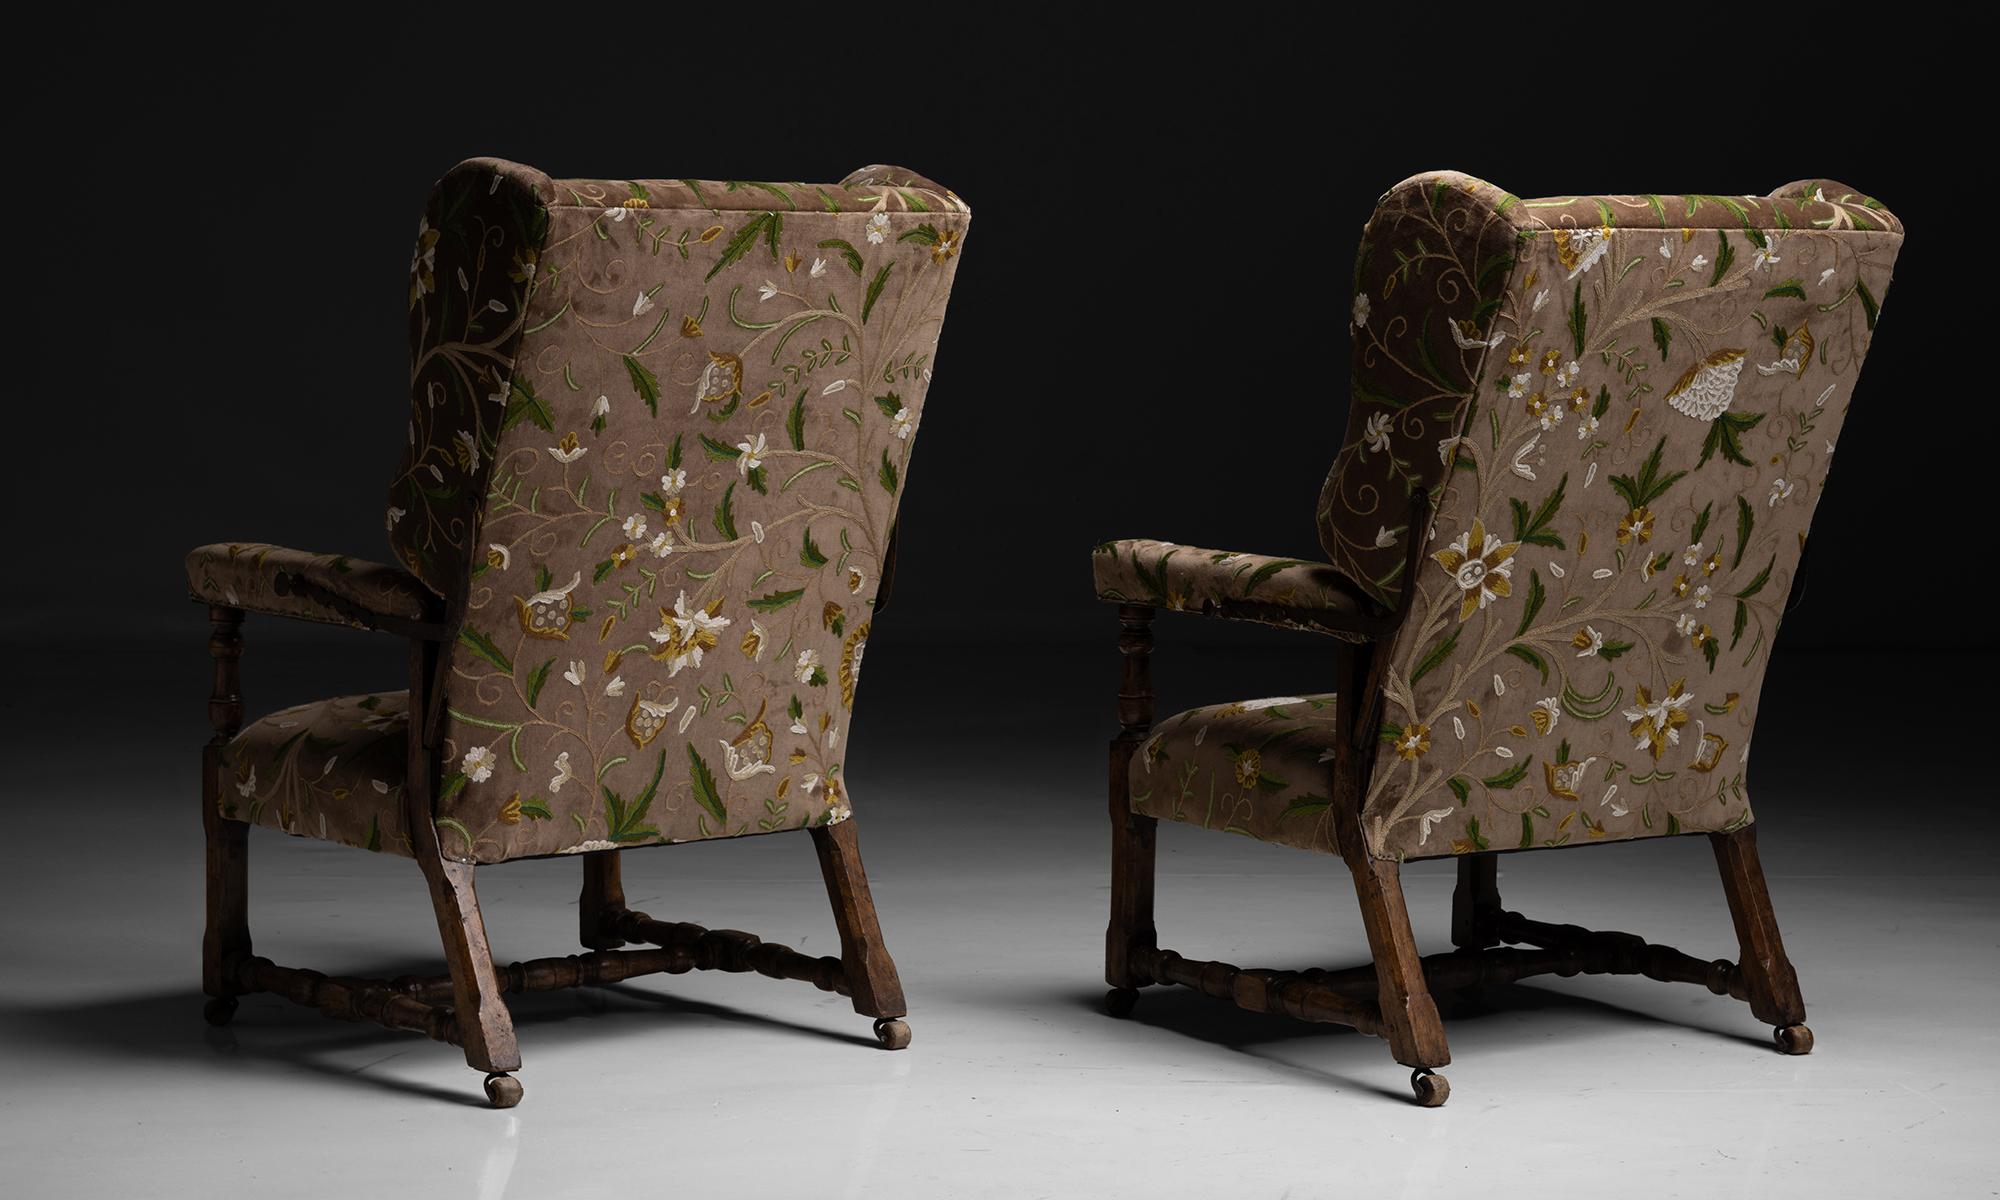 Reclining Wing Chairs in Crewel Velvet, France circa 1880 In Good Condition For Sale In Culver City, CA